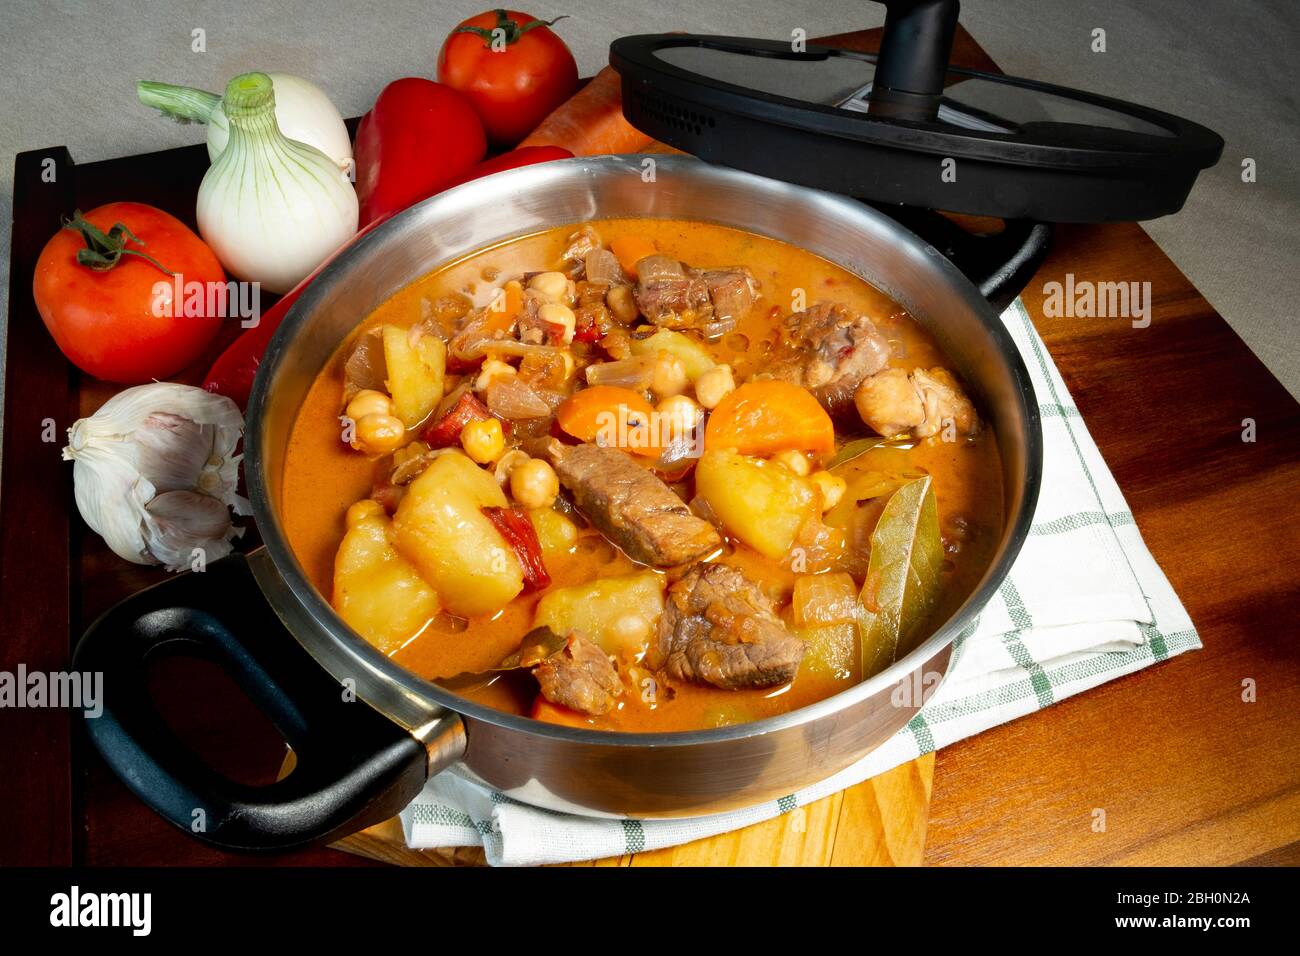 Beef stew in a large pot with vegetables and a wood table, seen from directly above ,part of a series Stock Photo